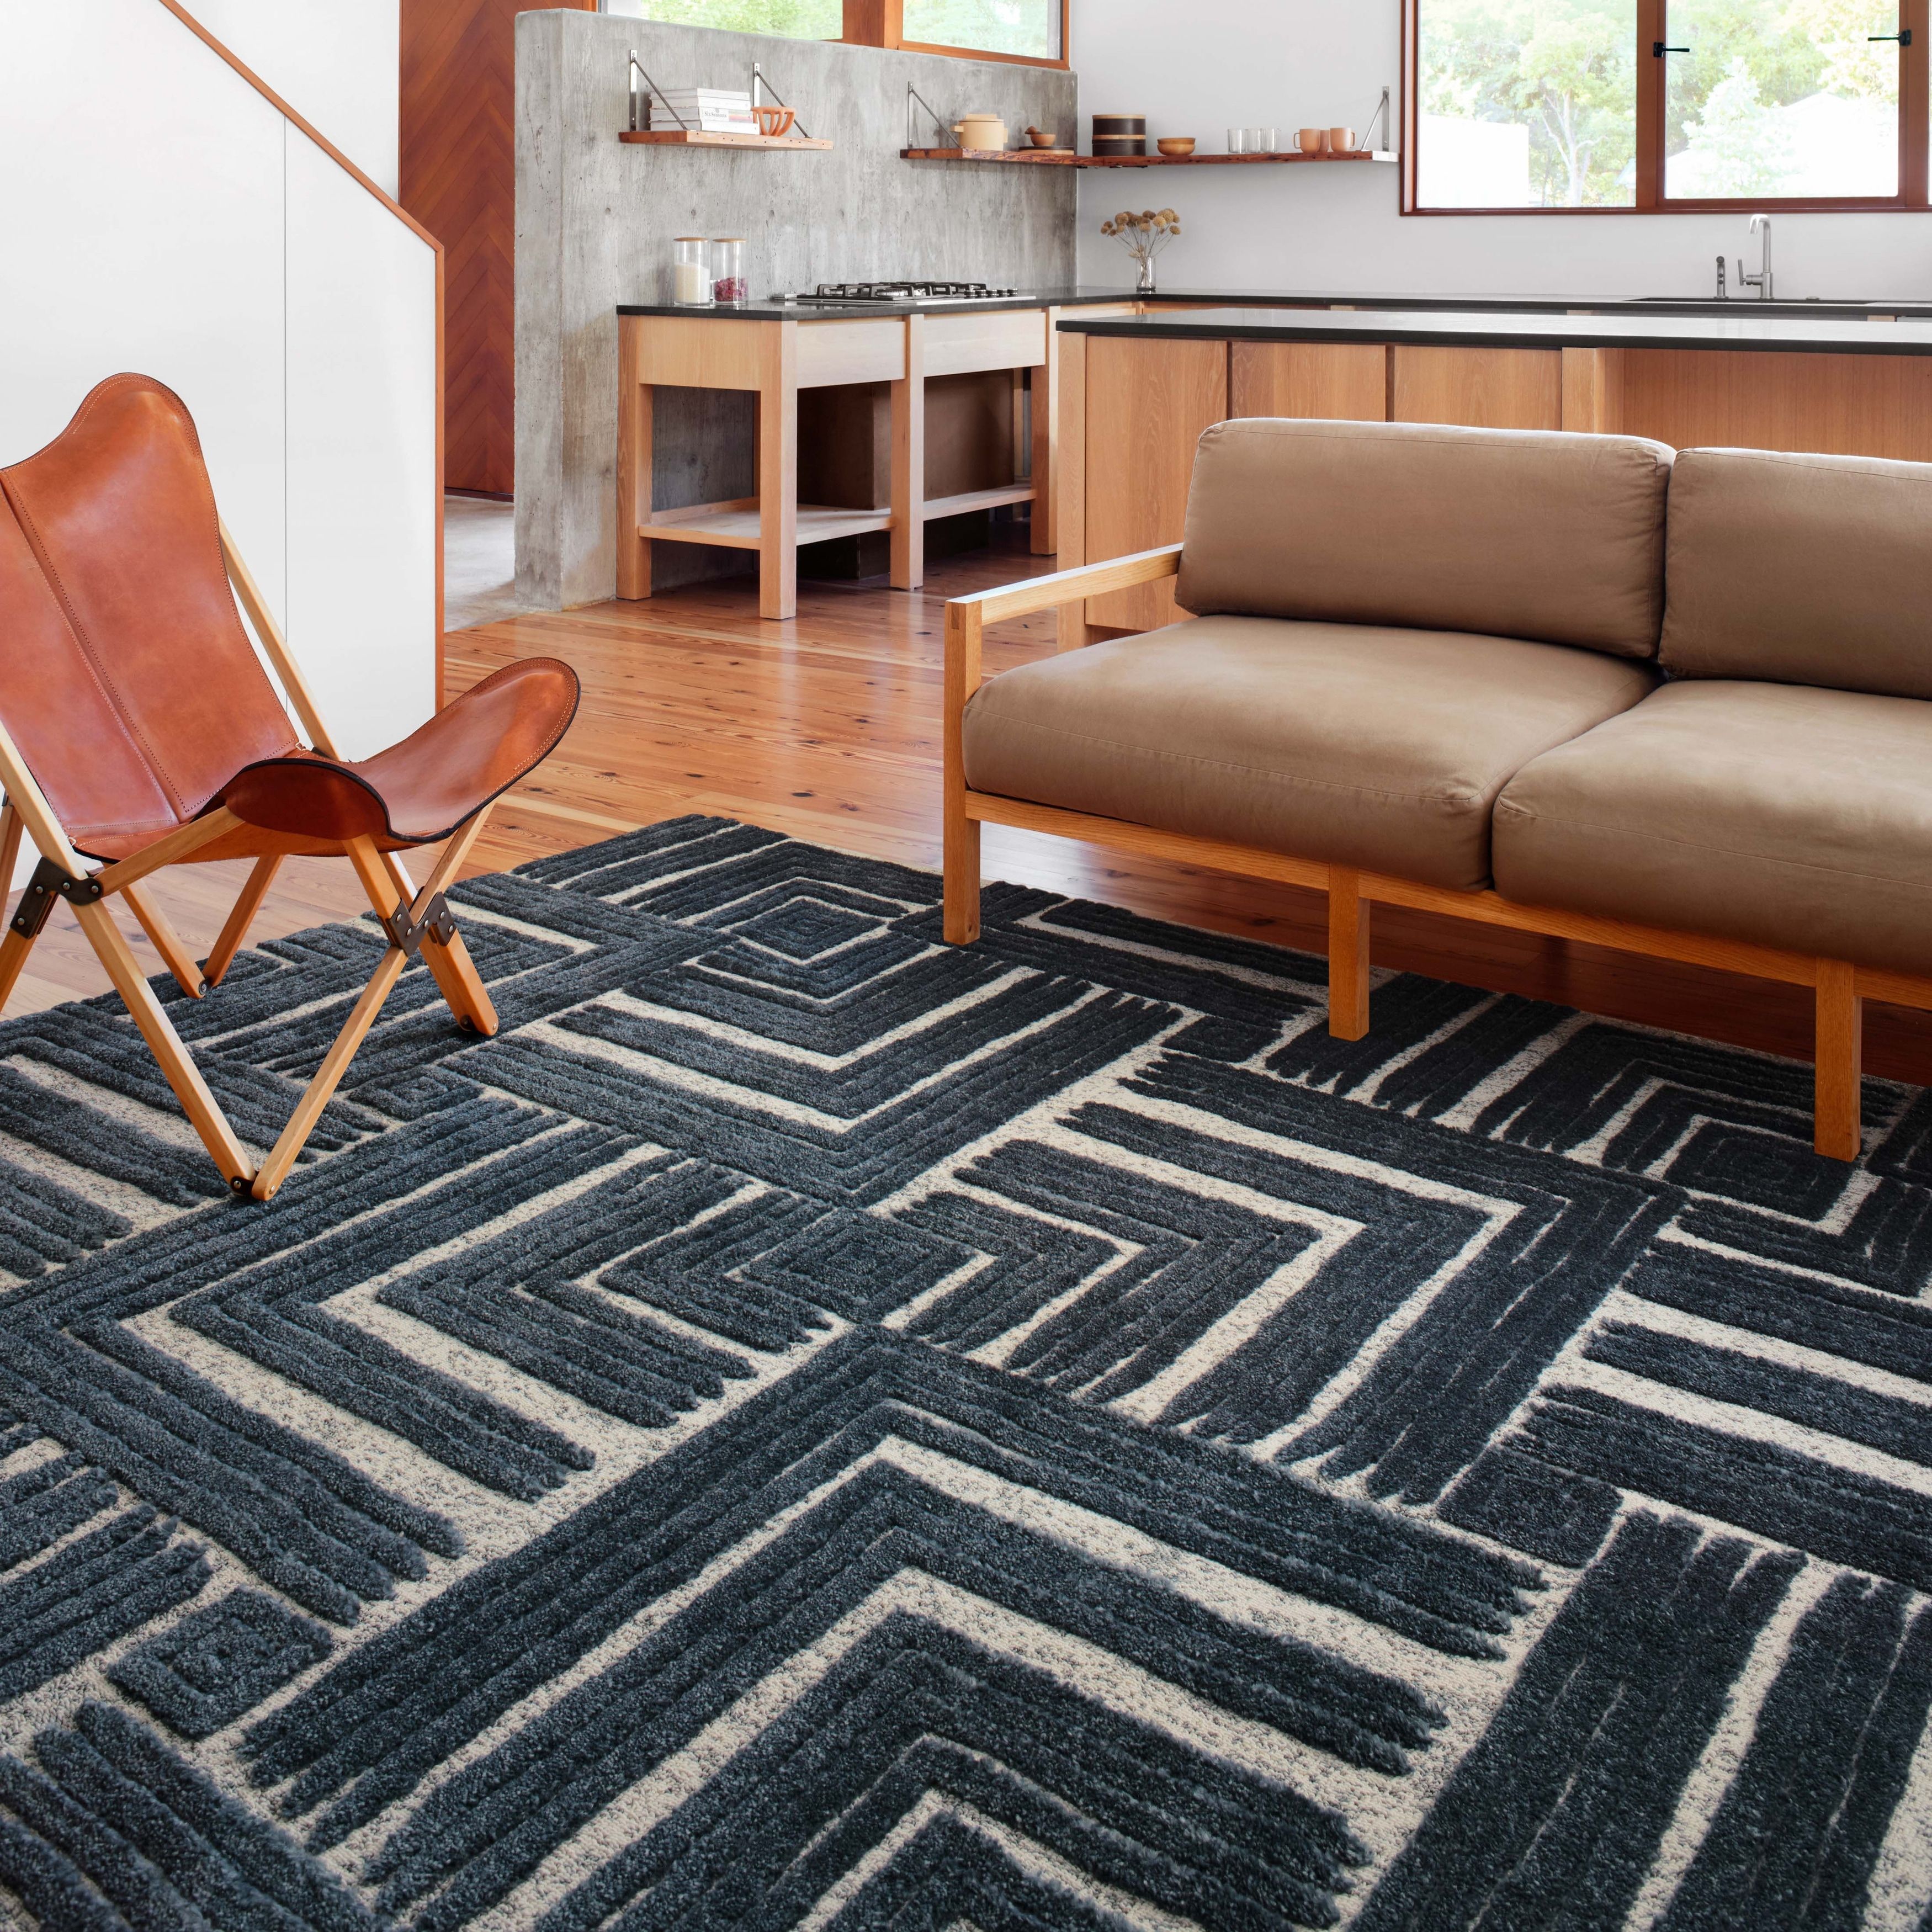 Alexander Home Vail Mid Century Modern Geometric Square Area Rug – On Sale  – Overstock – 31663956 Regarding Modern Square Rugs (Photo 4 of 15)